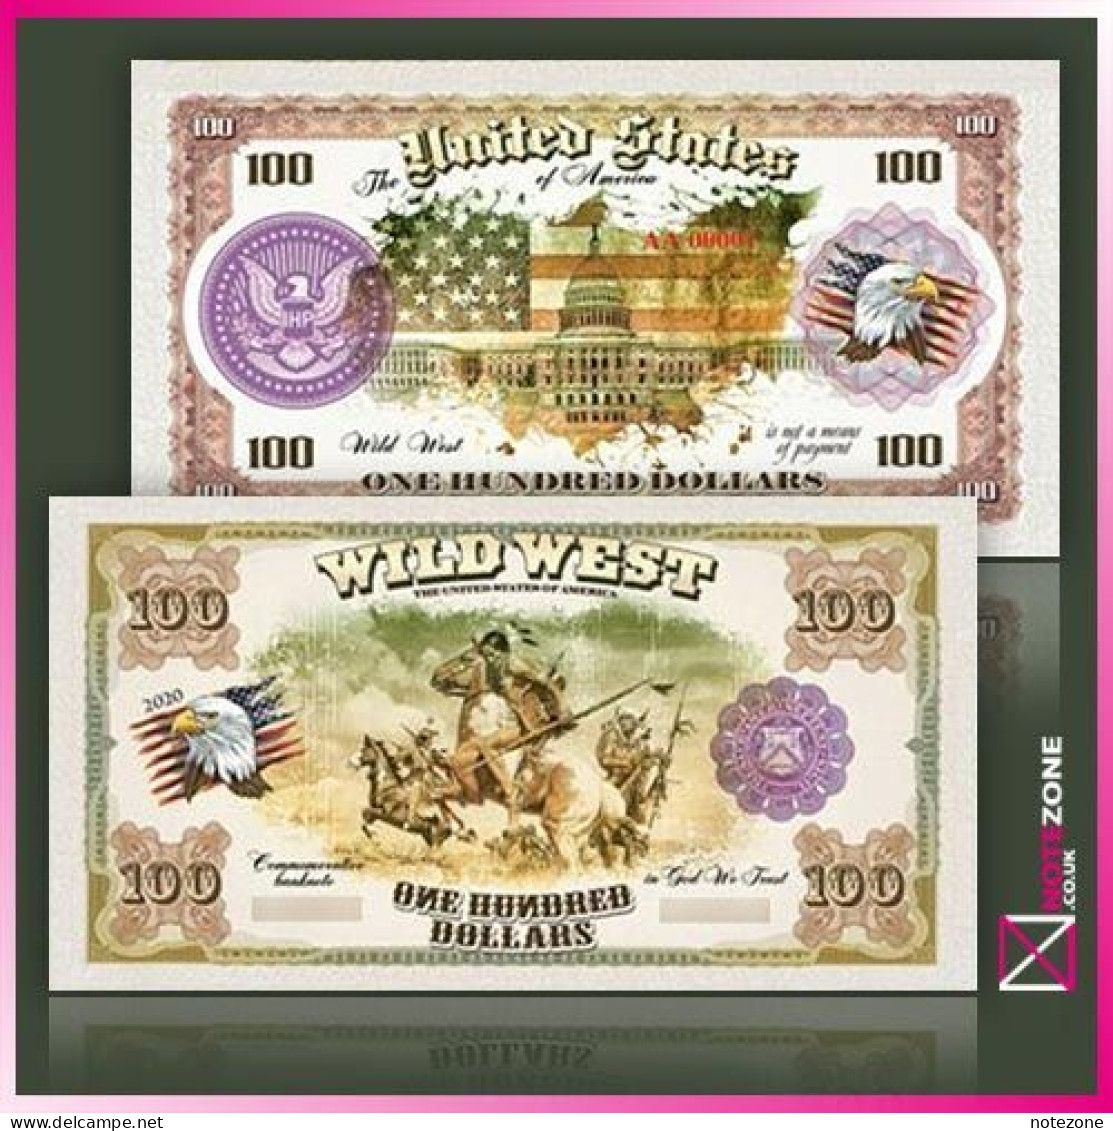 5 Notes Set! WILD WEST USA $100 PLASTIC Notes With Spot UV Private Fantasy Test Note - Colecciones Lotes Mixtos